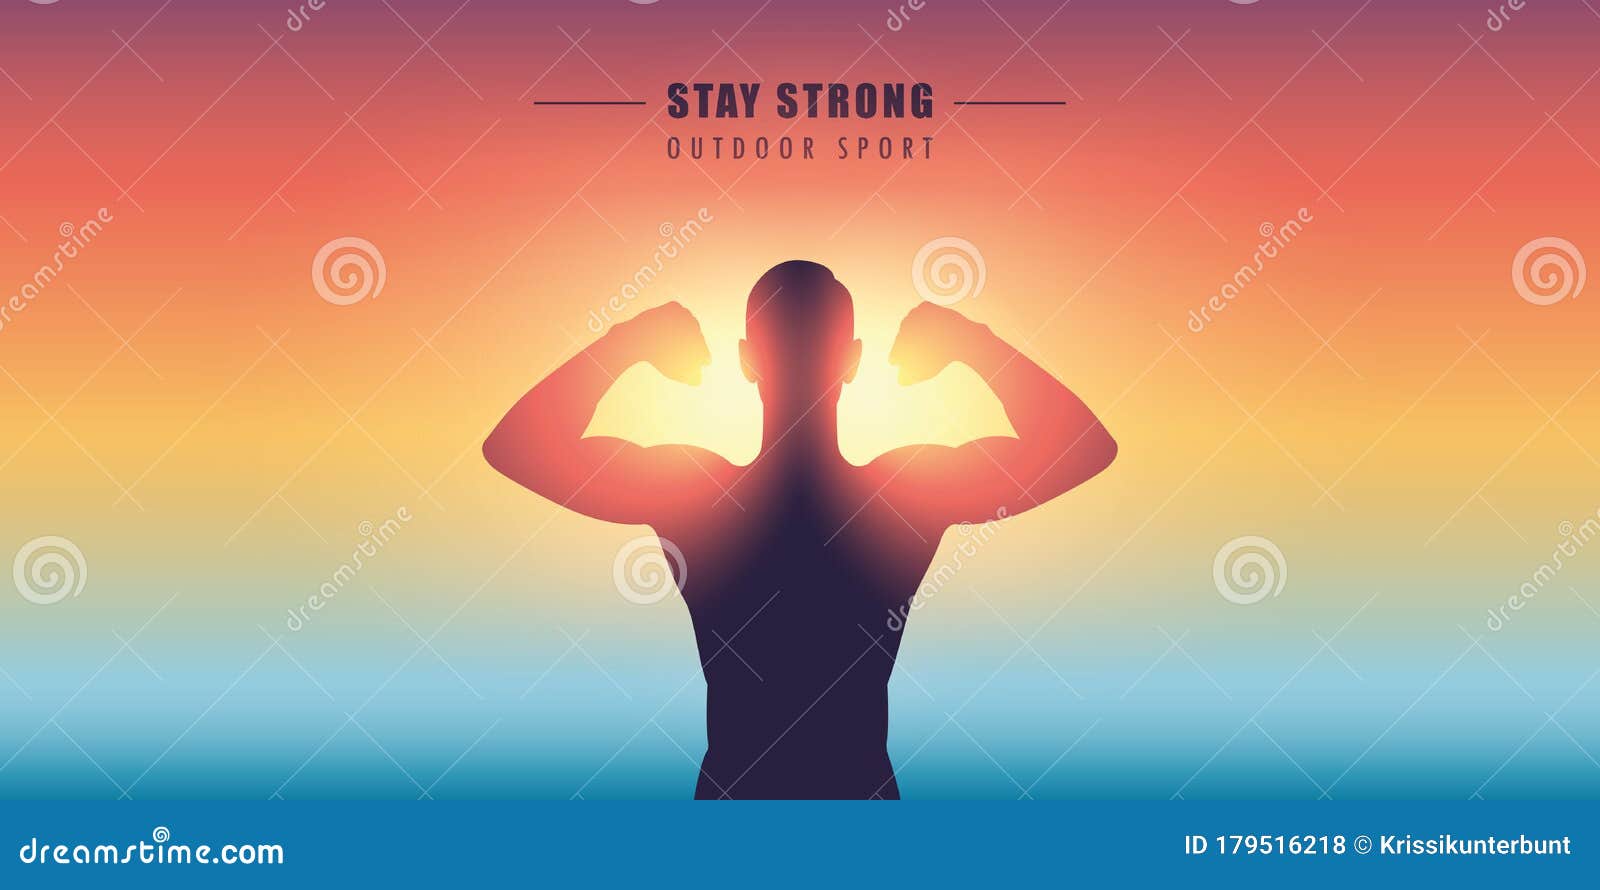 Stay Strong Outdoor Sport Muscular Man Silhouette Stock Vector ...